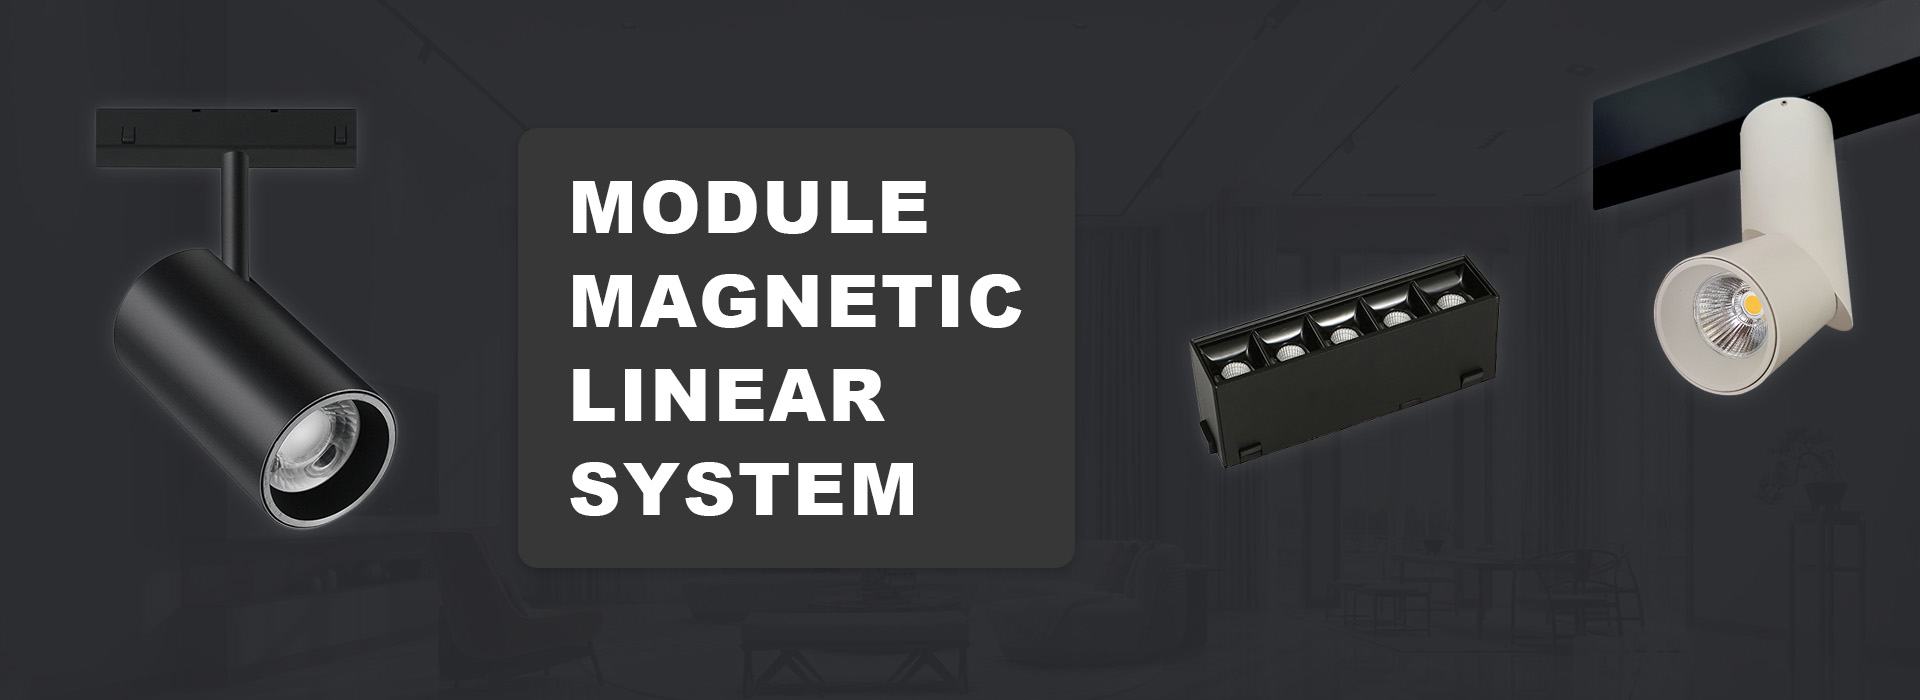 Module magnetic linear system